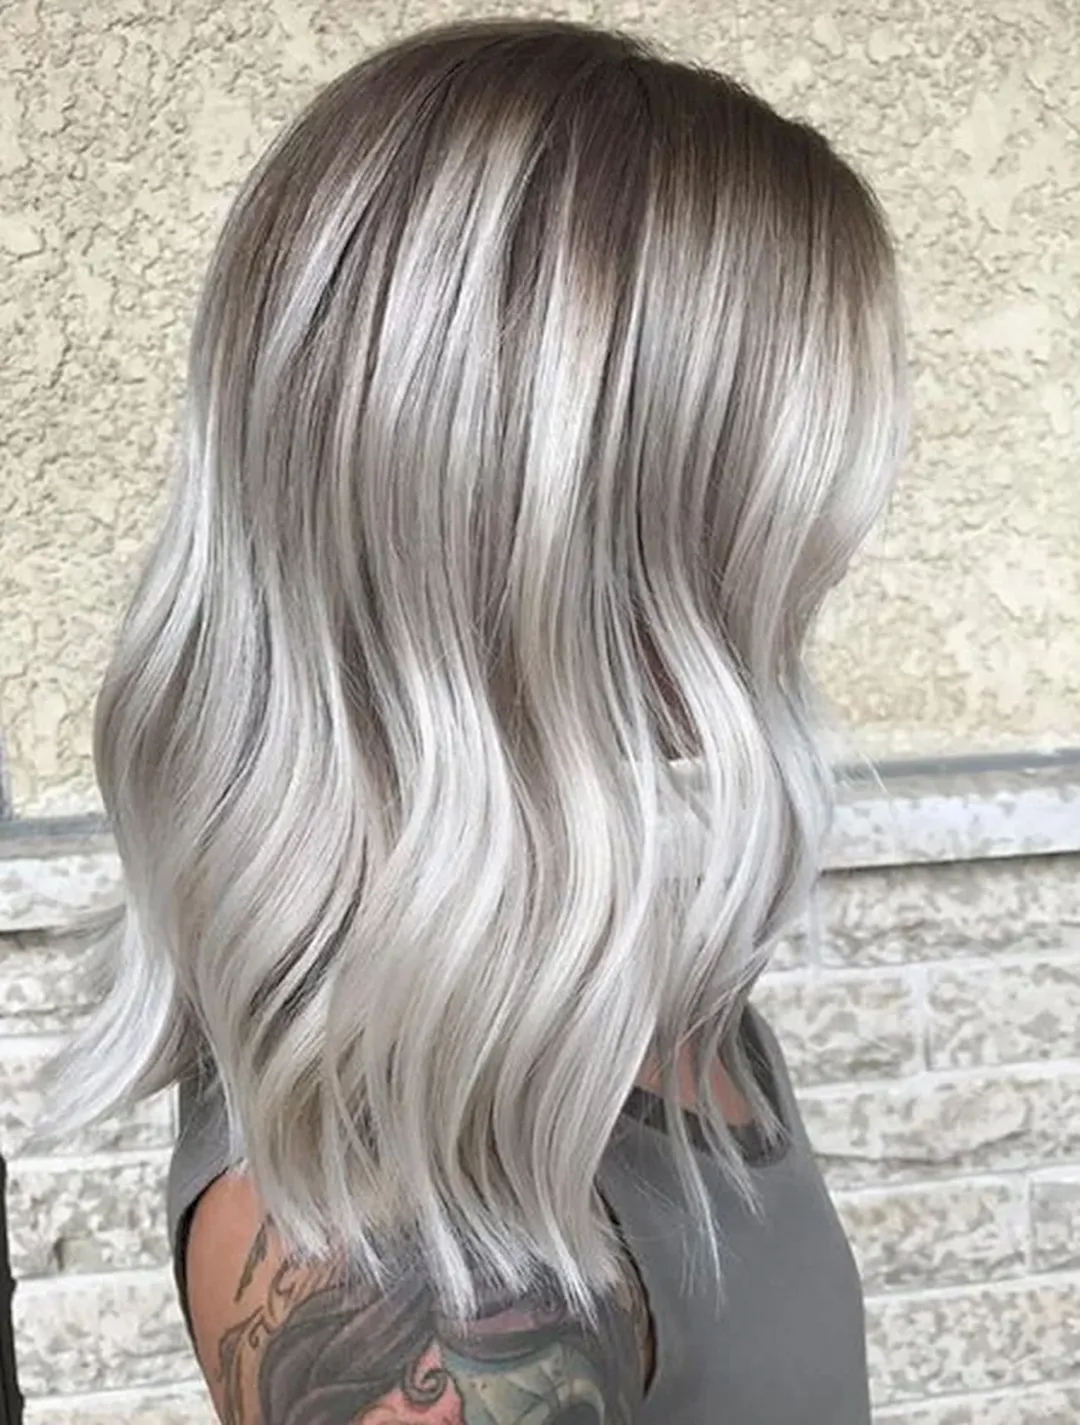 Platinum blonde hair color long hairstyles from hairstyleslife